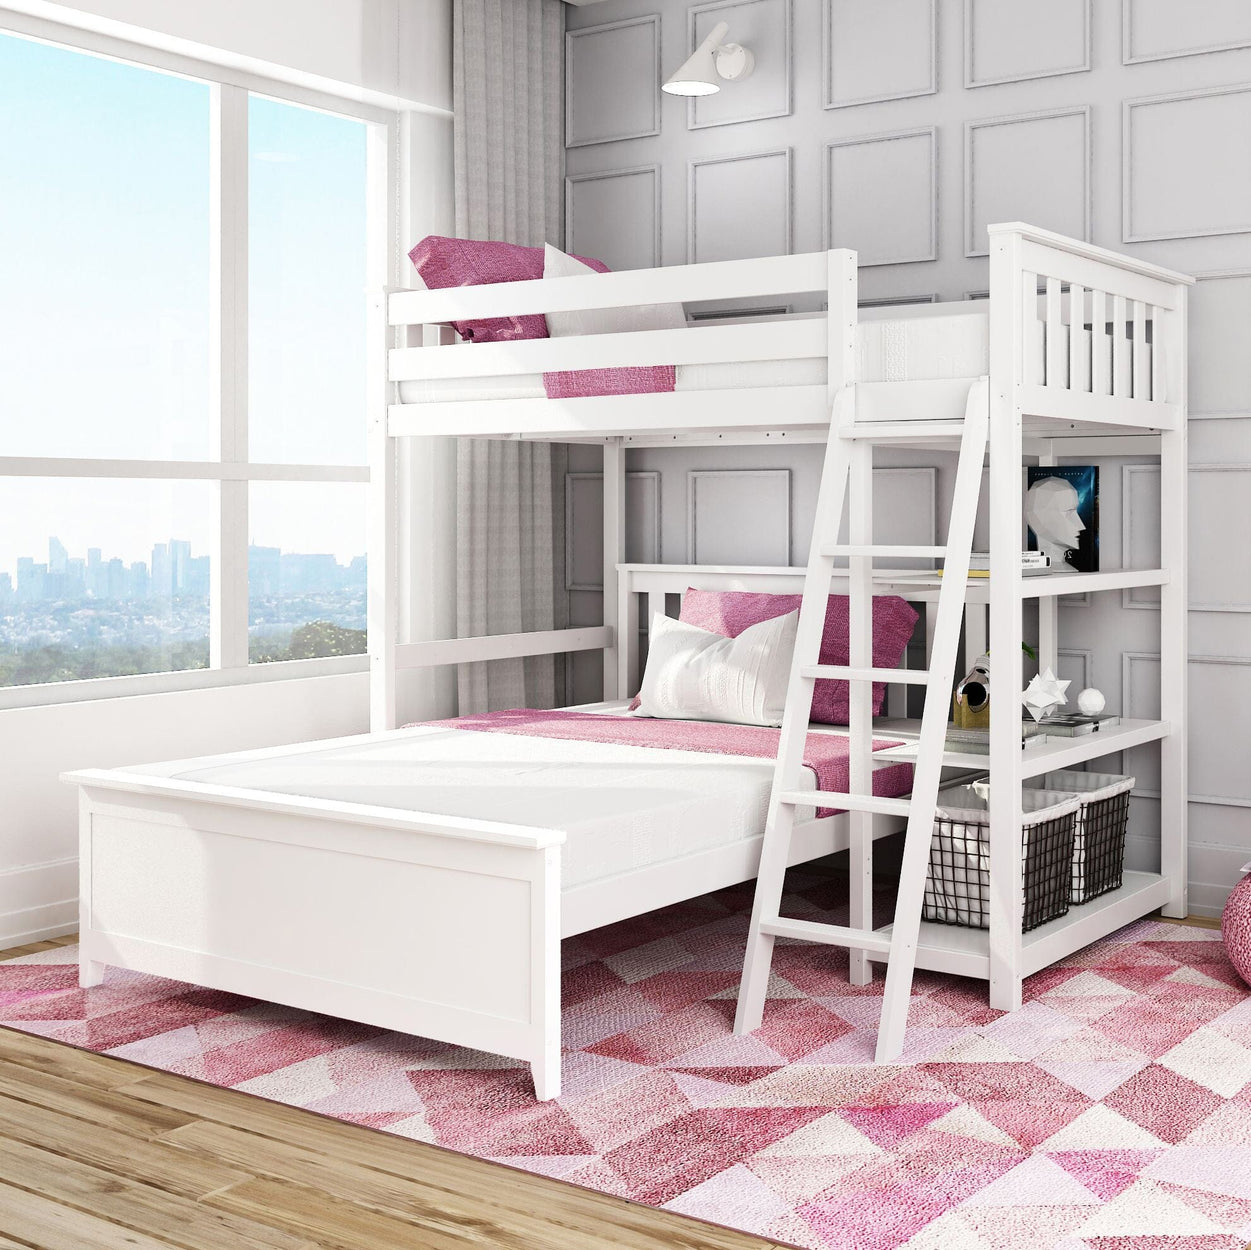 18-912-002 : Bunk Beds L-Shaped Twin over Full Bunk Bed with Bookcase, White